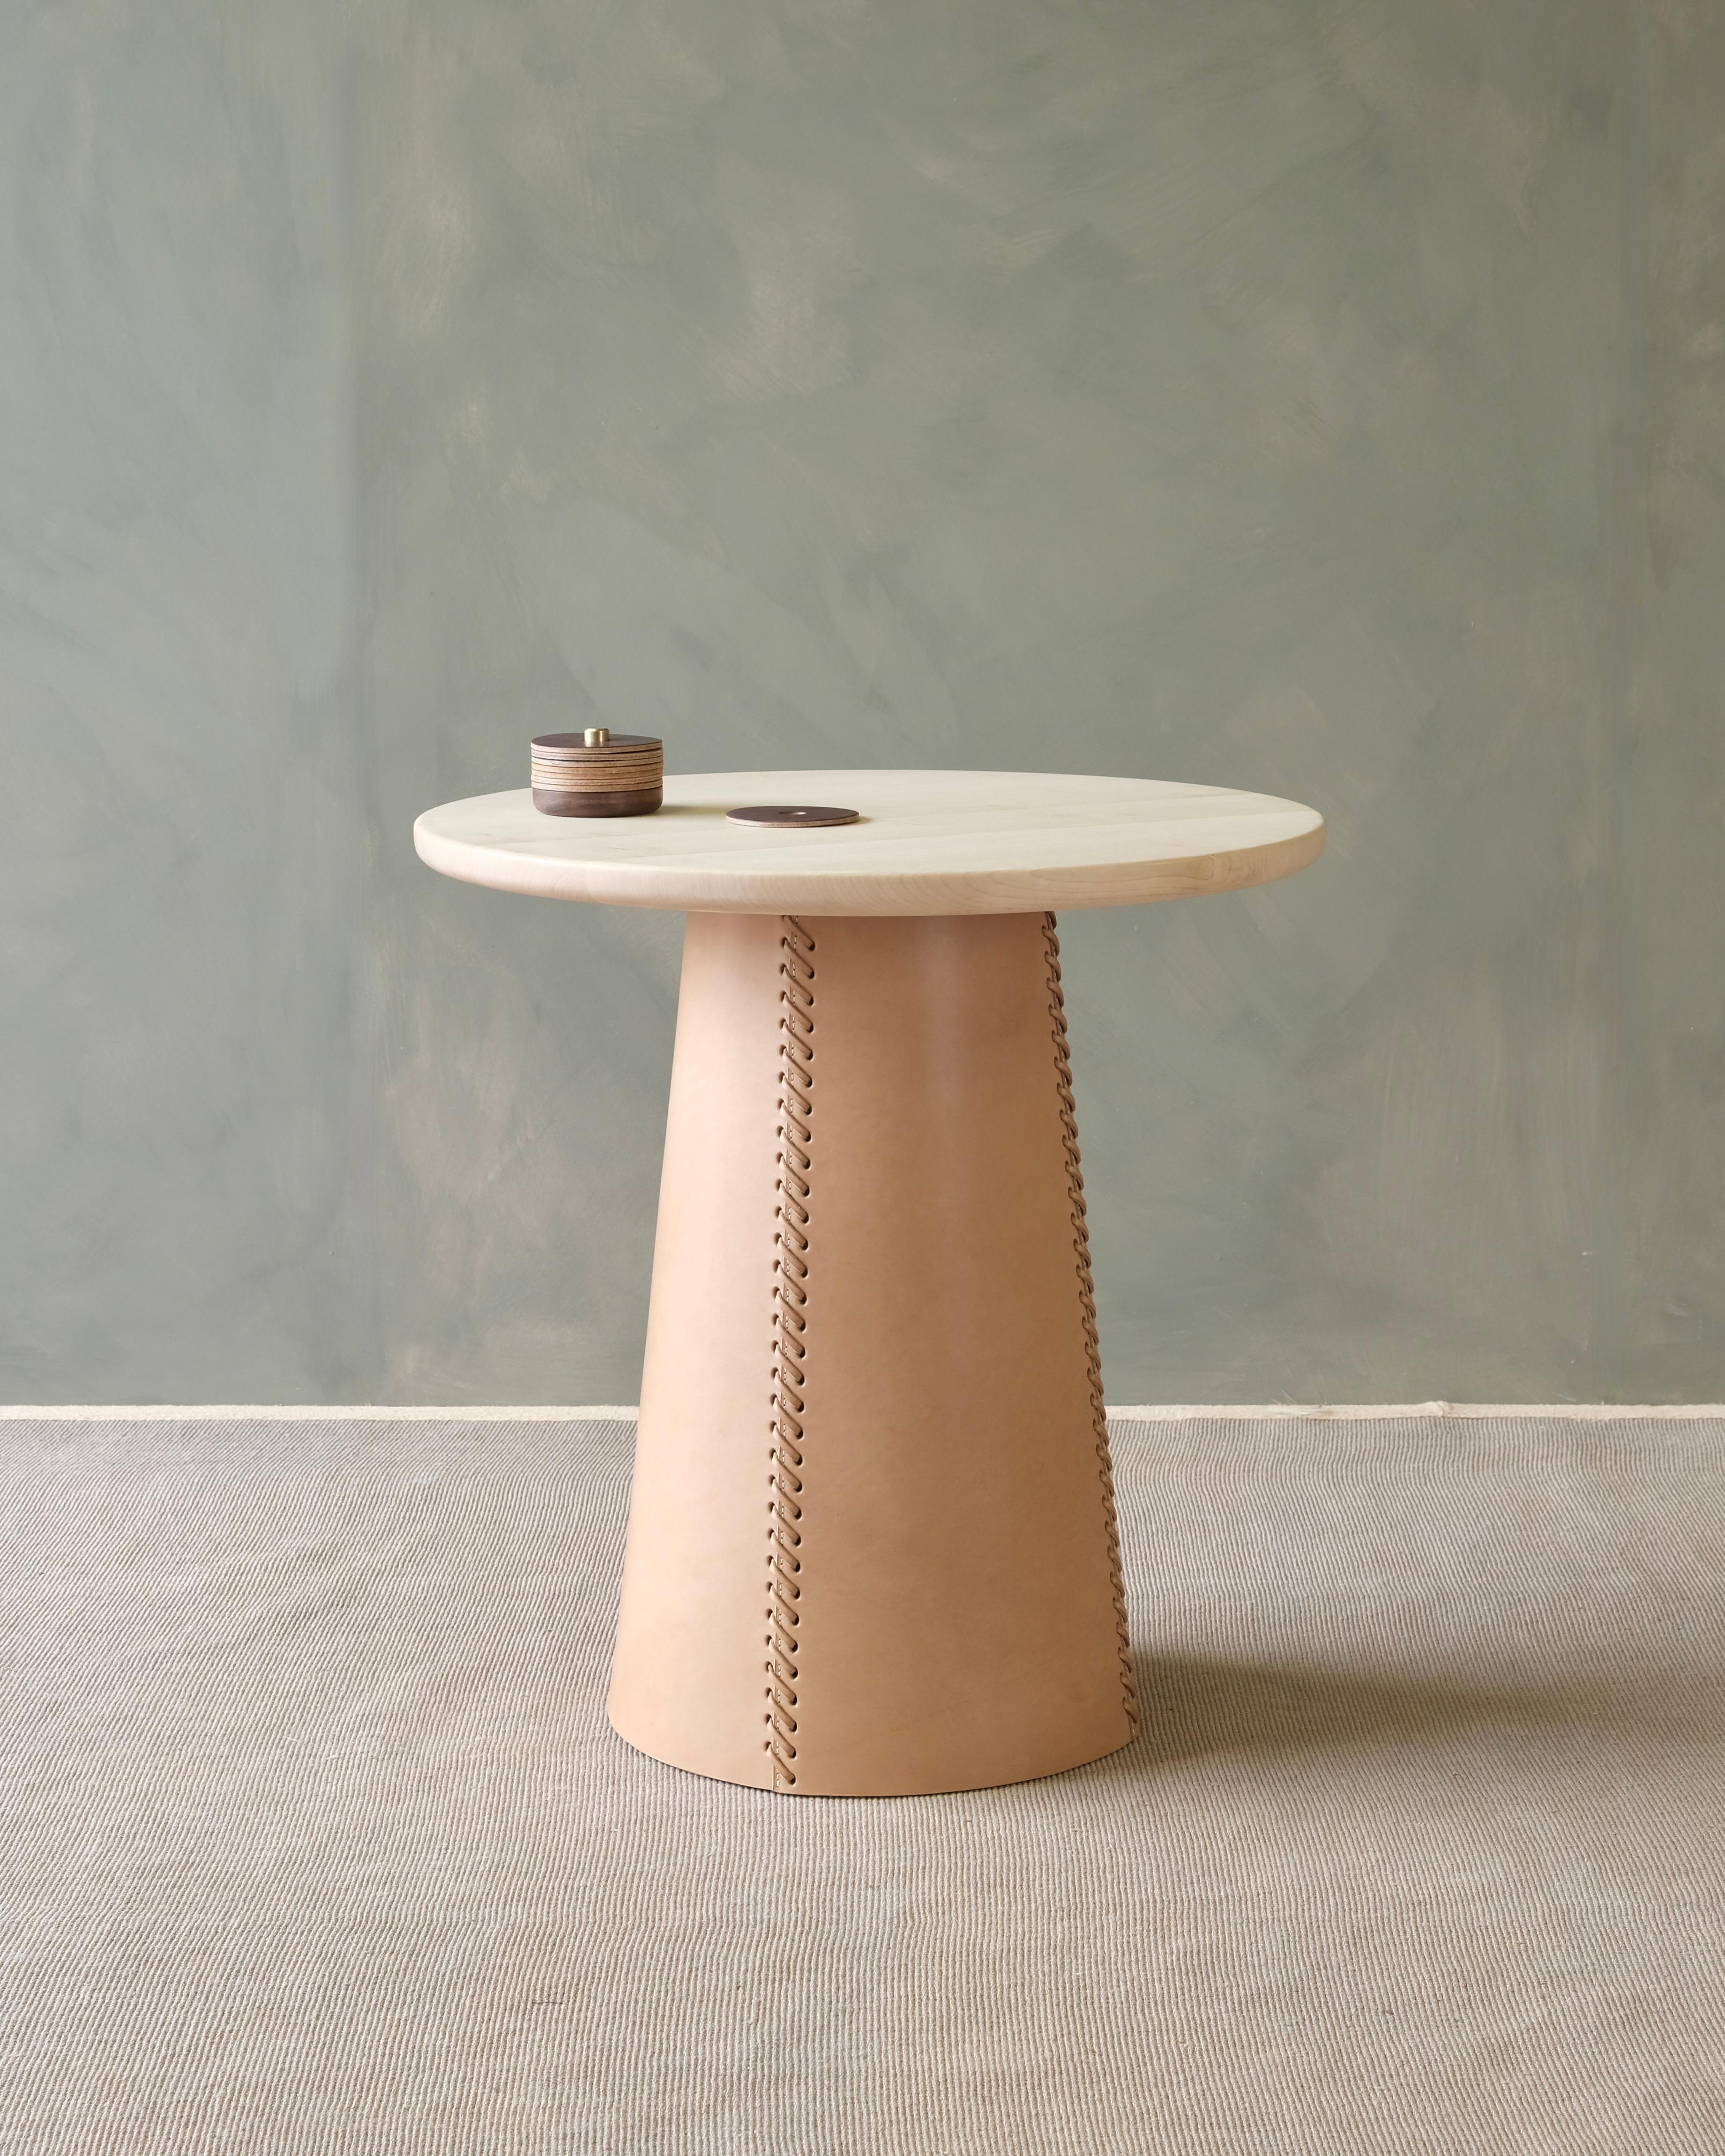 The Taper side table fuses traditional leather corking techniques with contemporary organic modern style. Each hand turned from solid wood on a lathe before being fitted with an oak bark tanned bridle leather sleeve. The leather is hand cut and